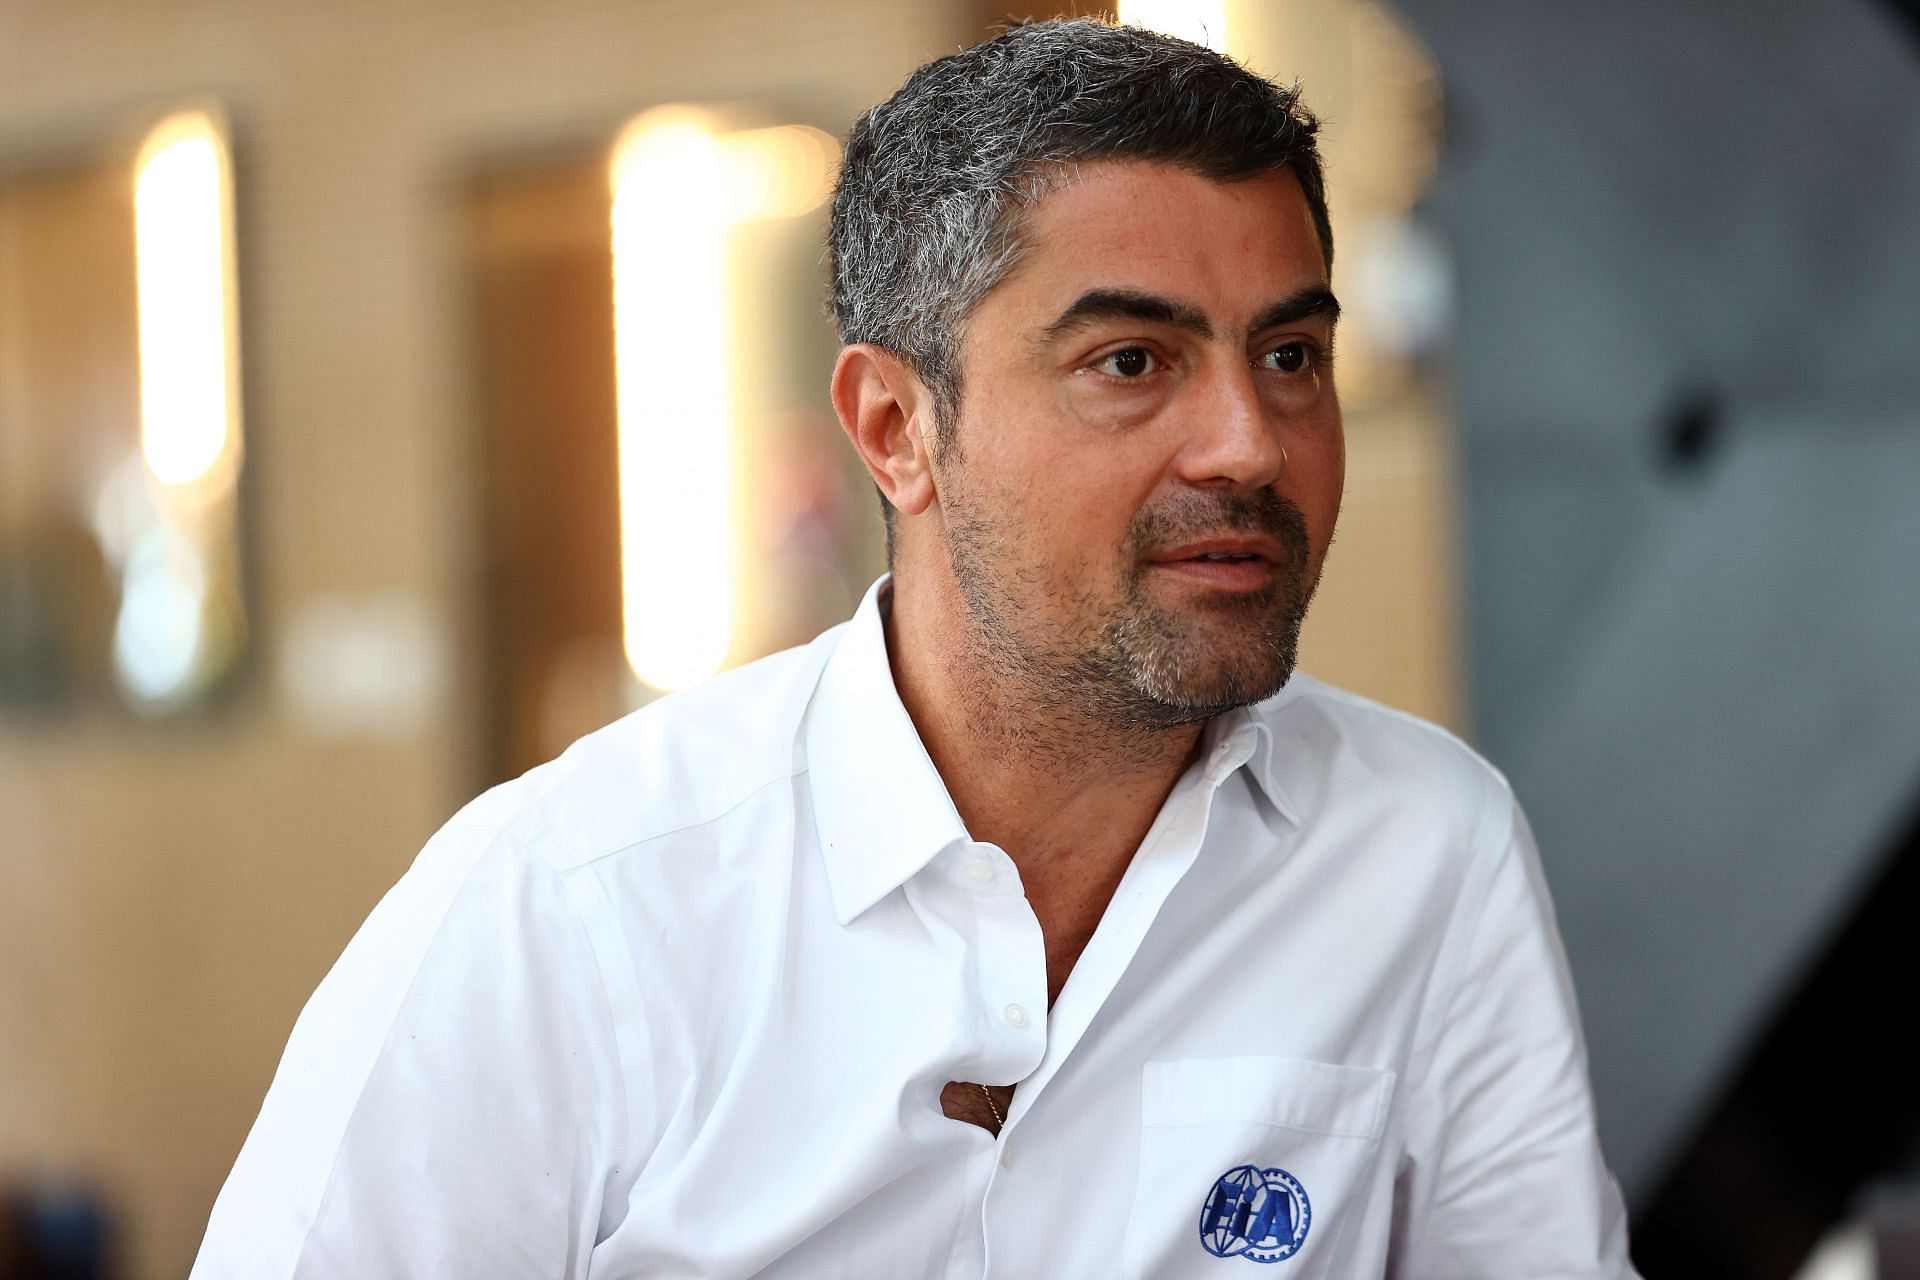 FIA Race Director Michael Masi is interviewed ahead of the 2021 season finale (Photo by Bryn Lennon/Getty Images)